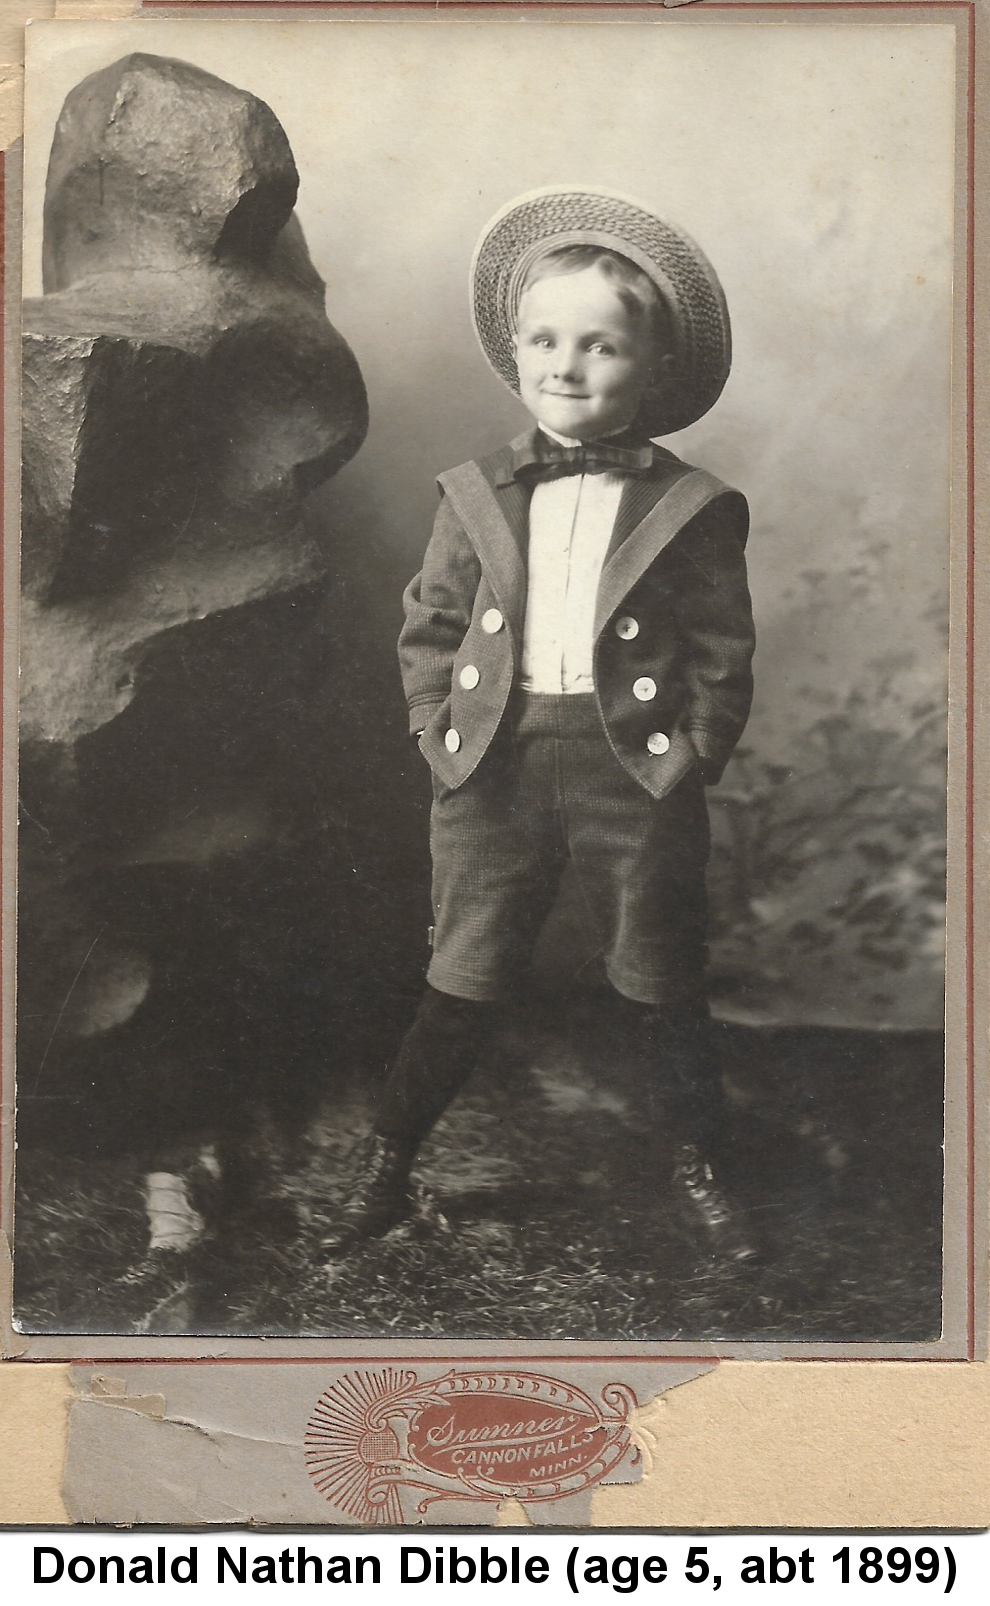 IMAGE/PHOTO: Donald Nathan Dibble (age 5, abt 1899): Black and white studio photo of a small boy wearing Little Lord Fauntleroy suit with straw hat cocked back on his head, bow tie, knickers and knee sox, standing next to a large rock in front of a cloth backdrop with his feet wide apart, knees turned in, hands in pockets, and his eyes aimed to the right.